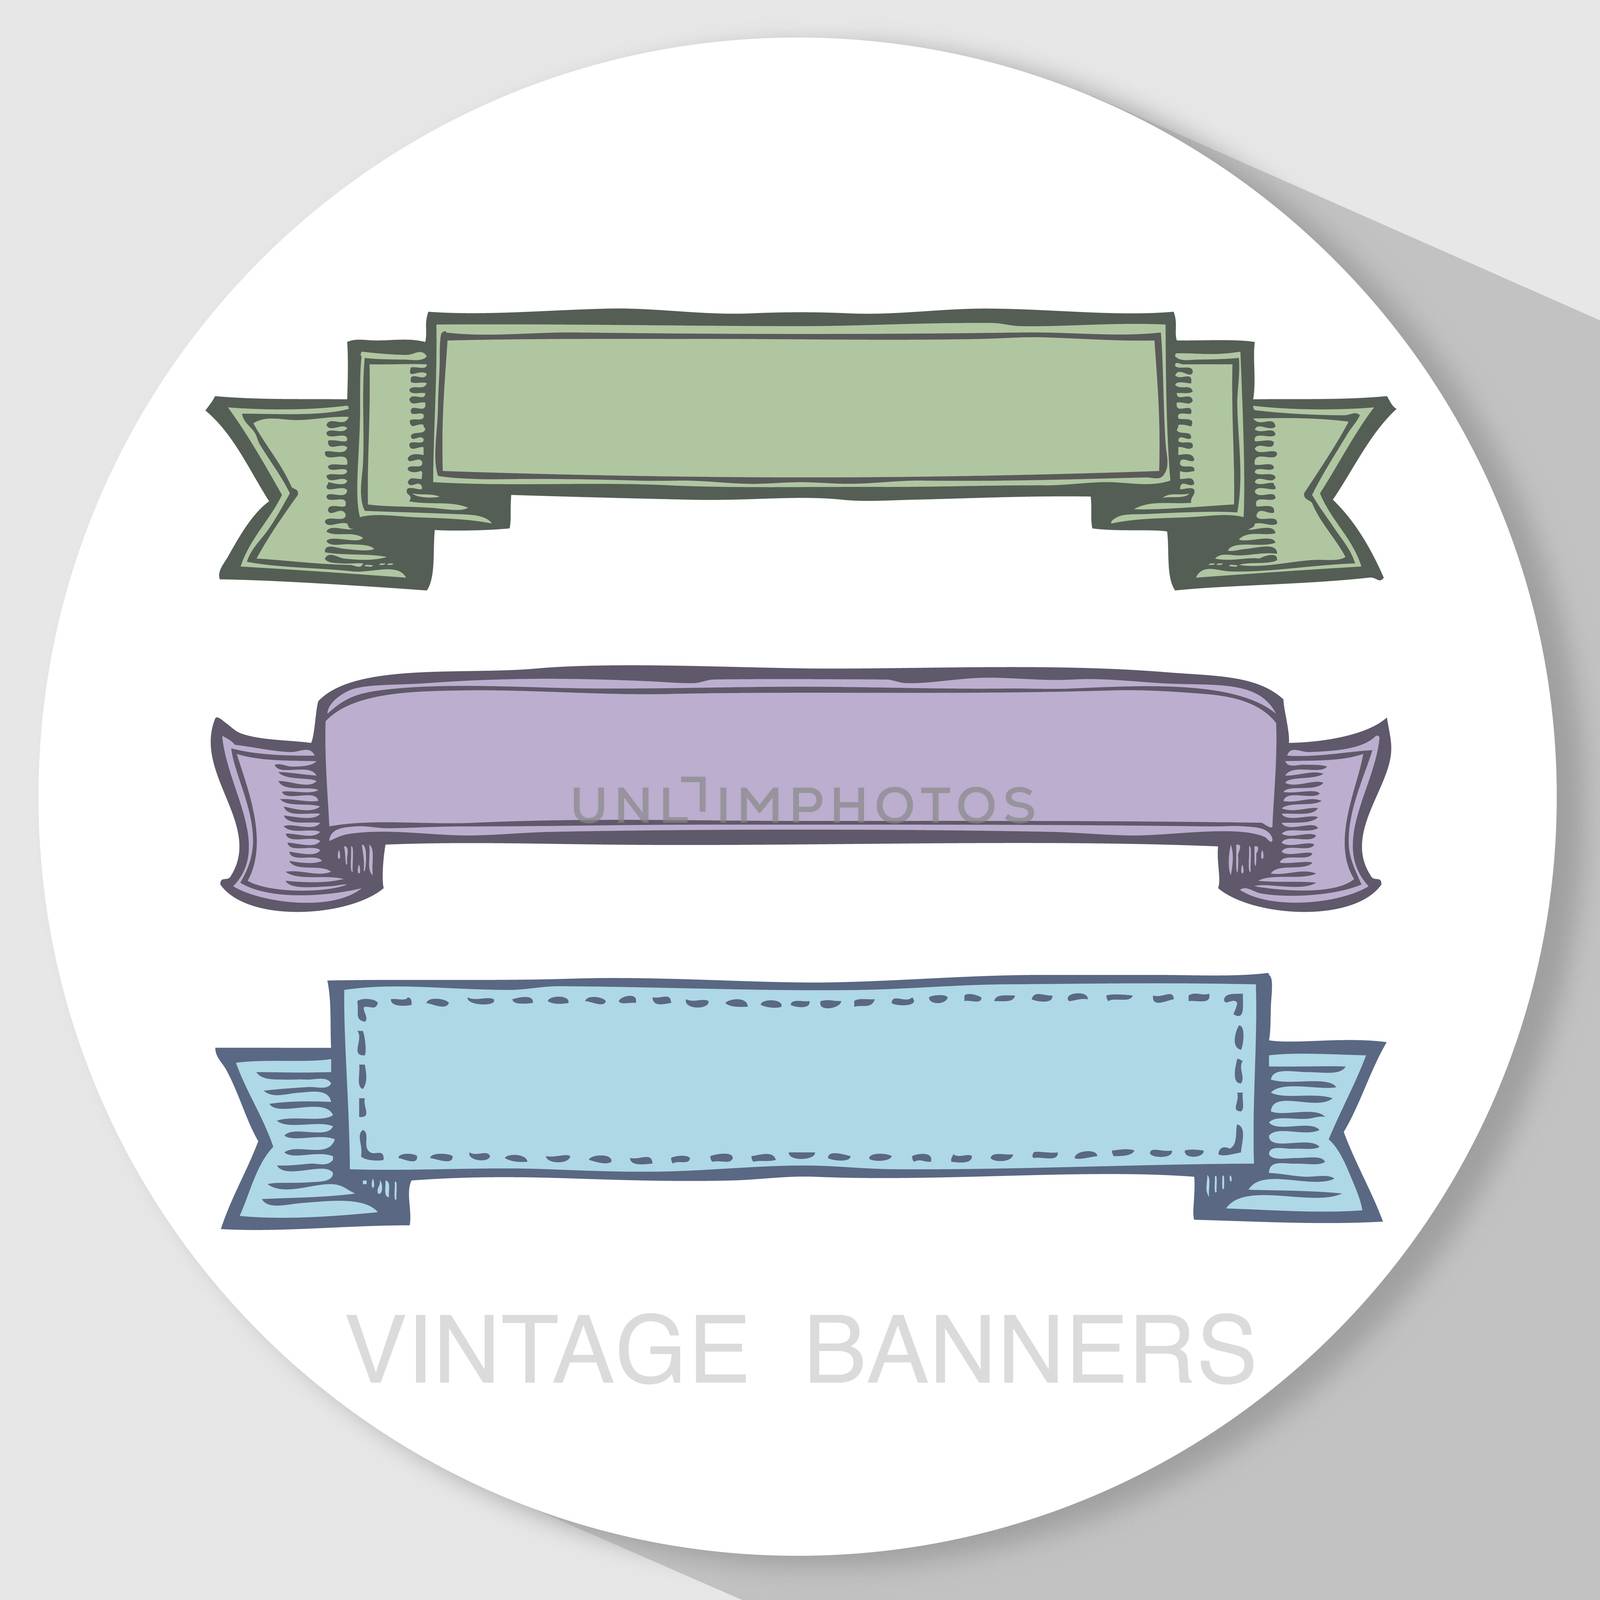 Freehand illustration of set of grunge ribbon banners on white background, doodle hand drawn